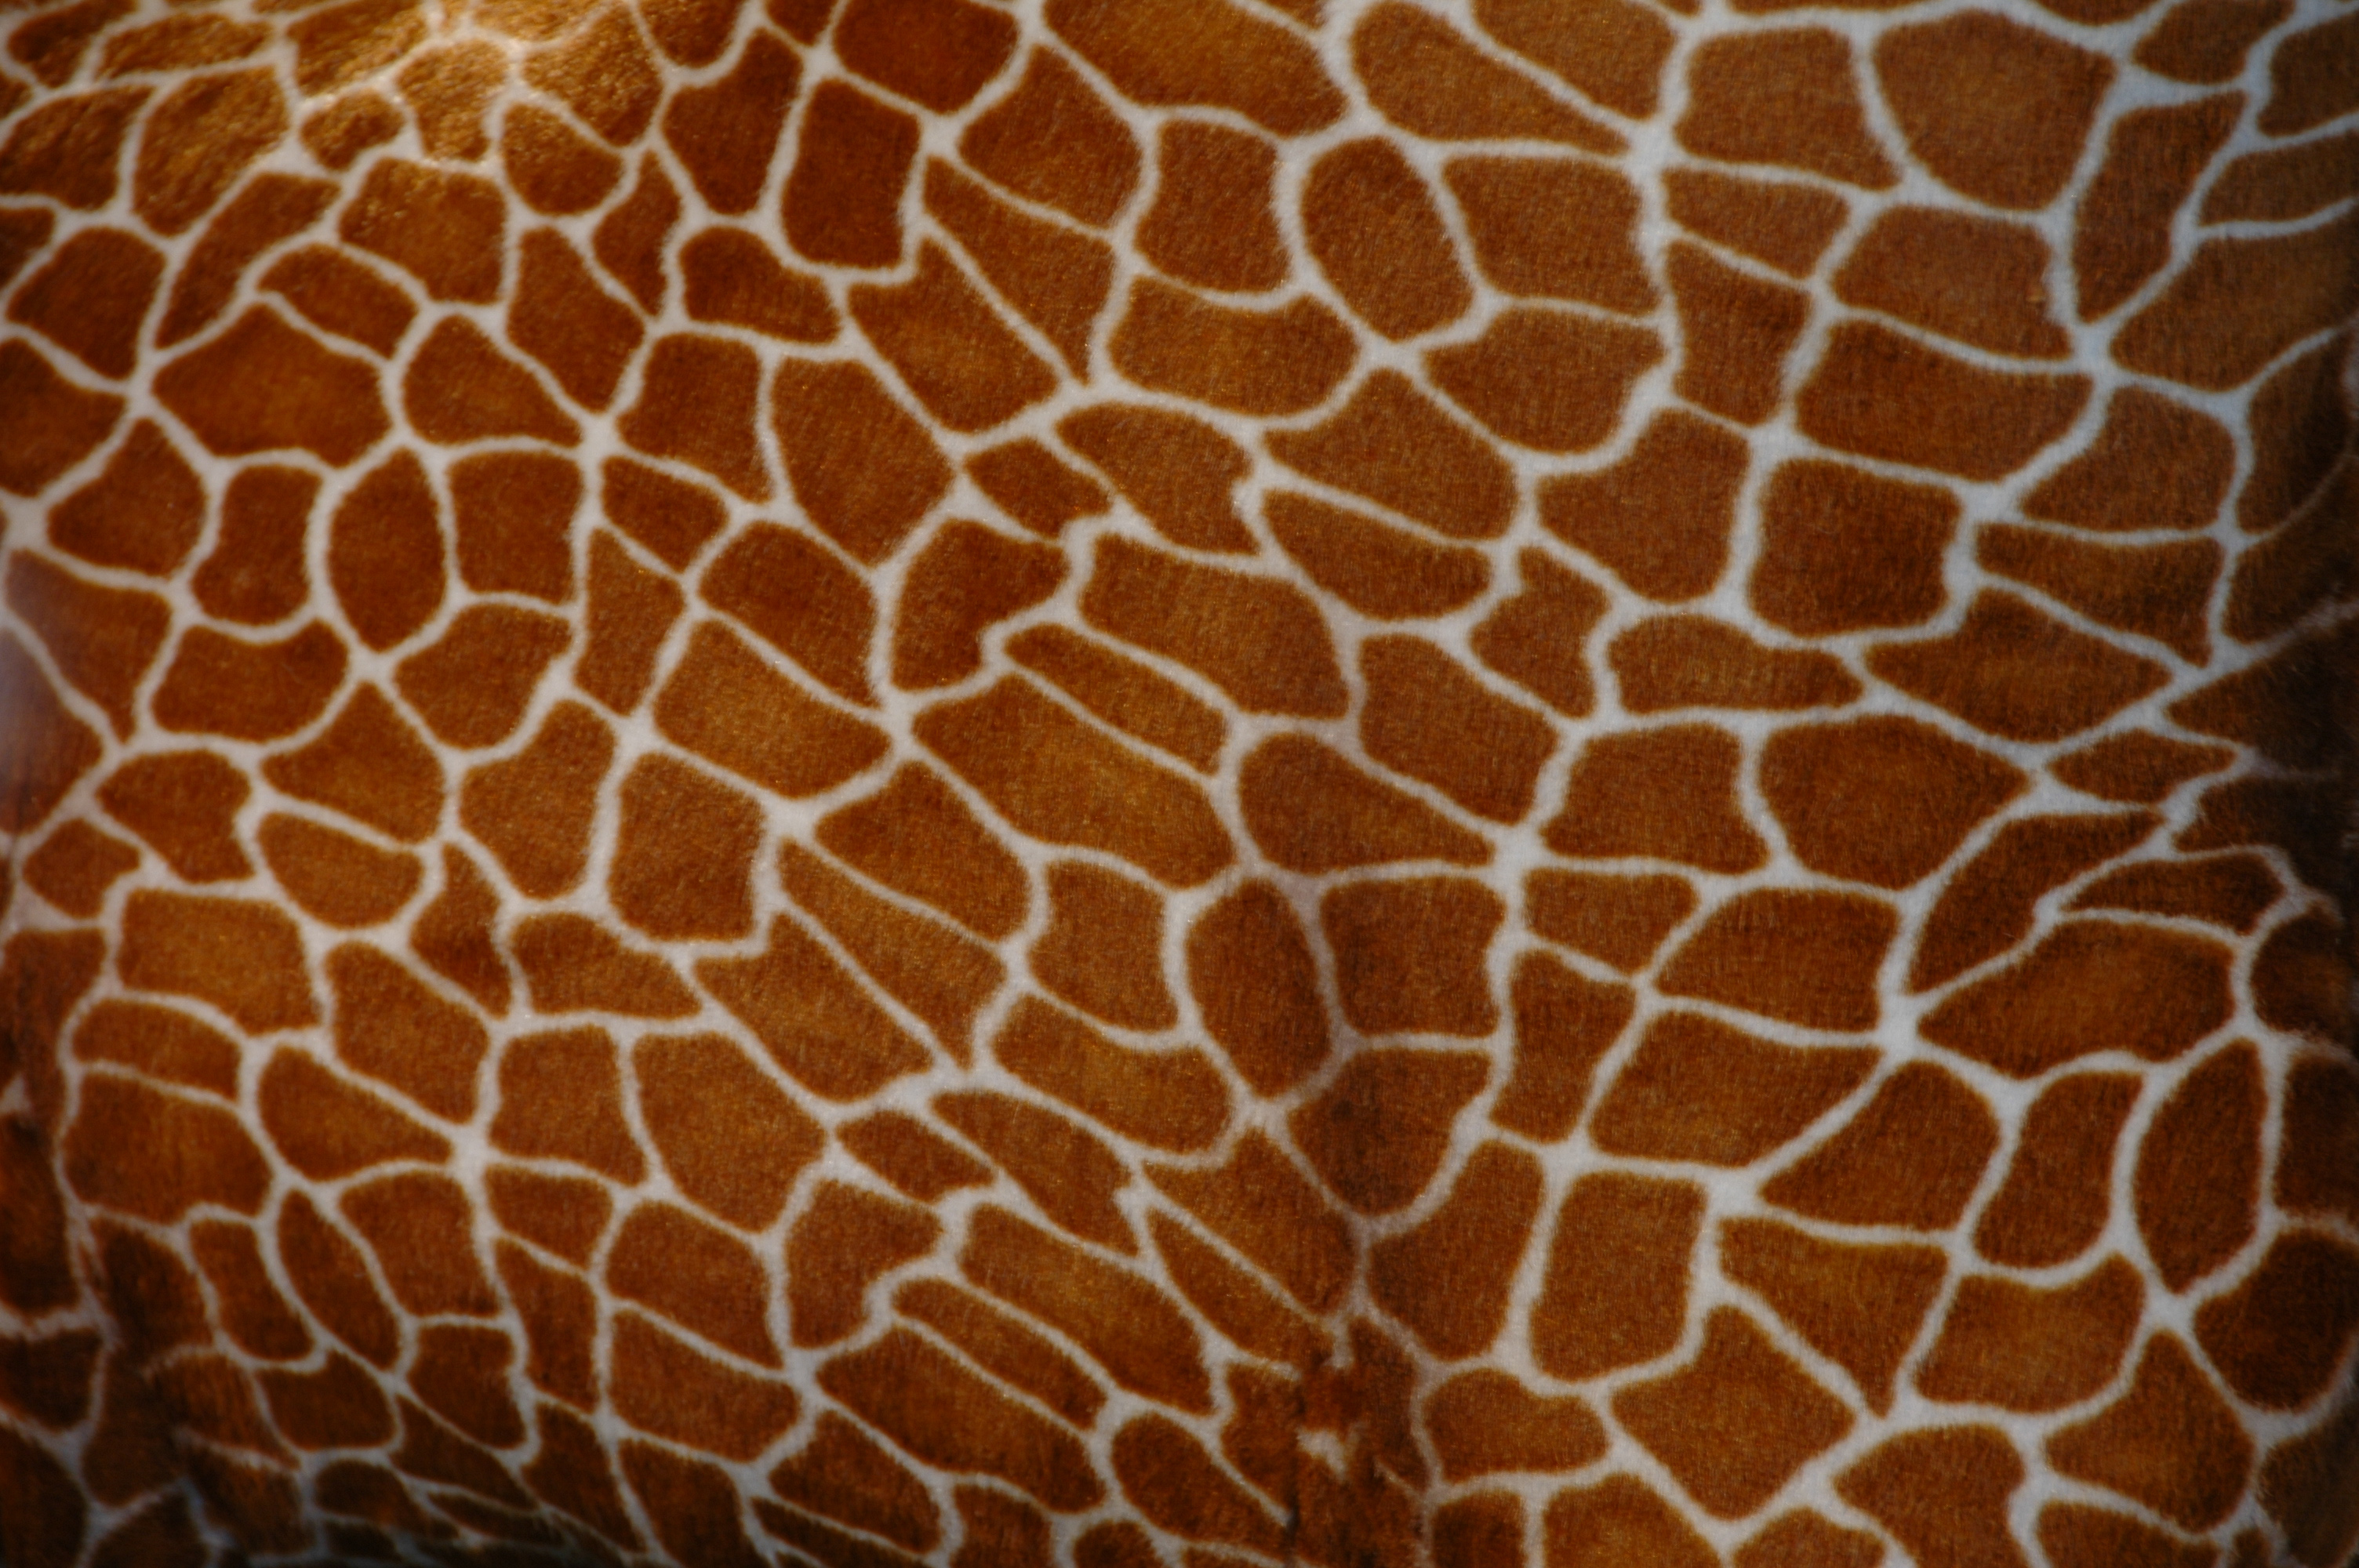 Giraffe Toy Skin Texture - Pattern Pictures free textures and free ...